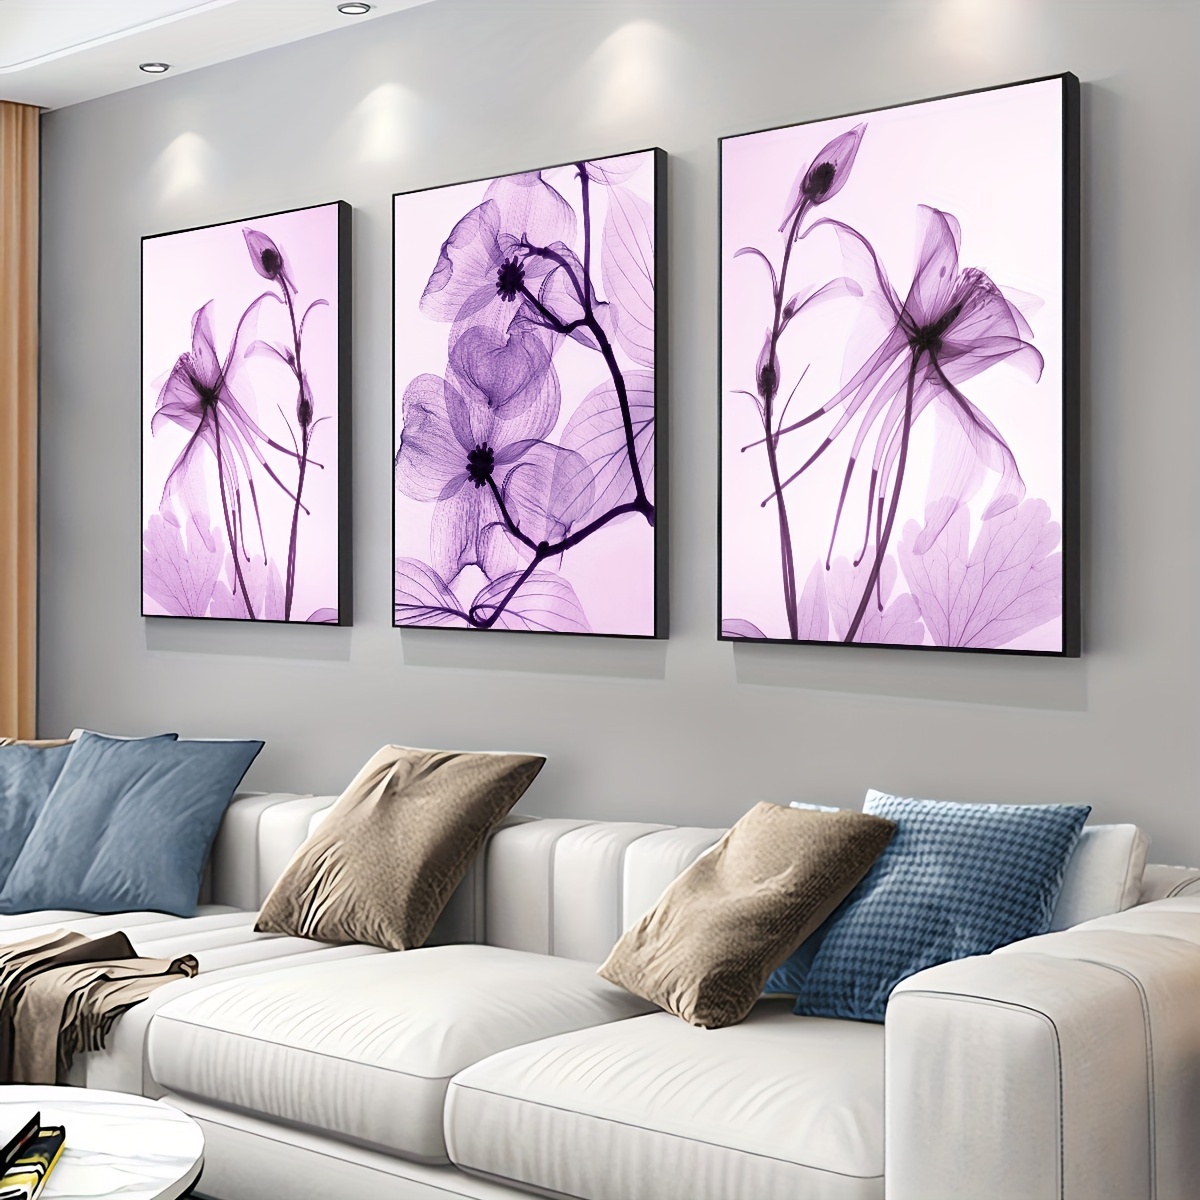 Large Grey Floral Wall Art Decor for Living Room Bedroom Modern Black and  White Poppy Flower Hand Painted Oil Painting Big Framed Spring Pictures  Gray